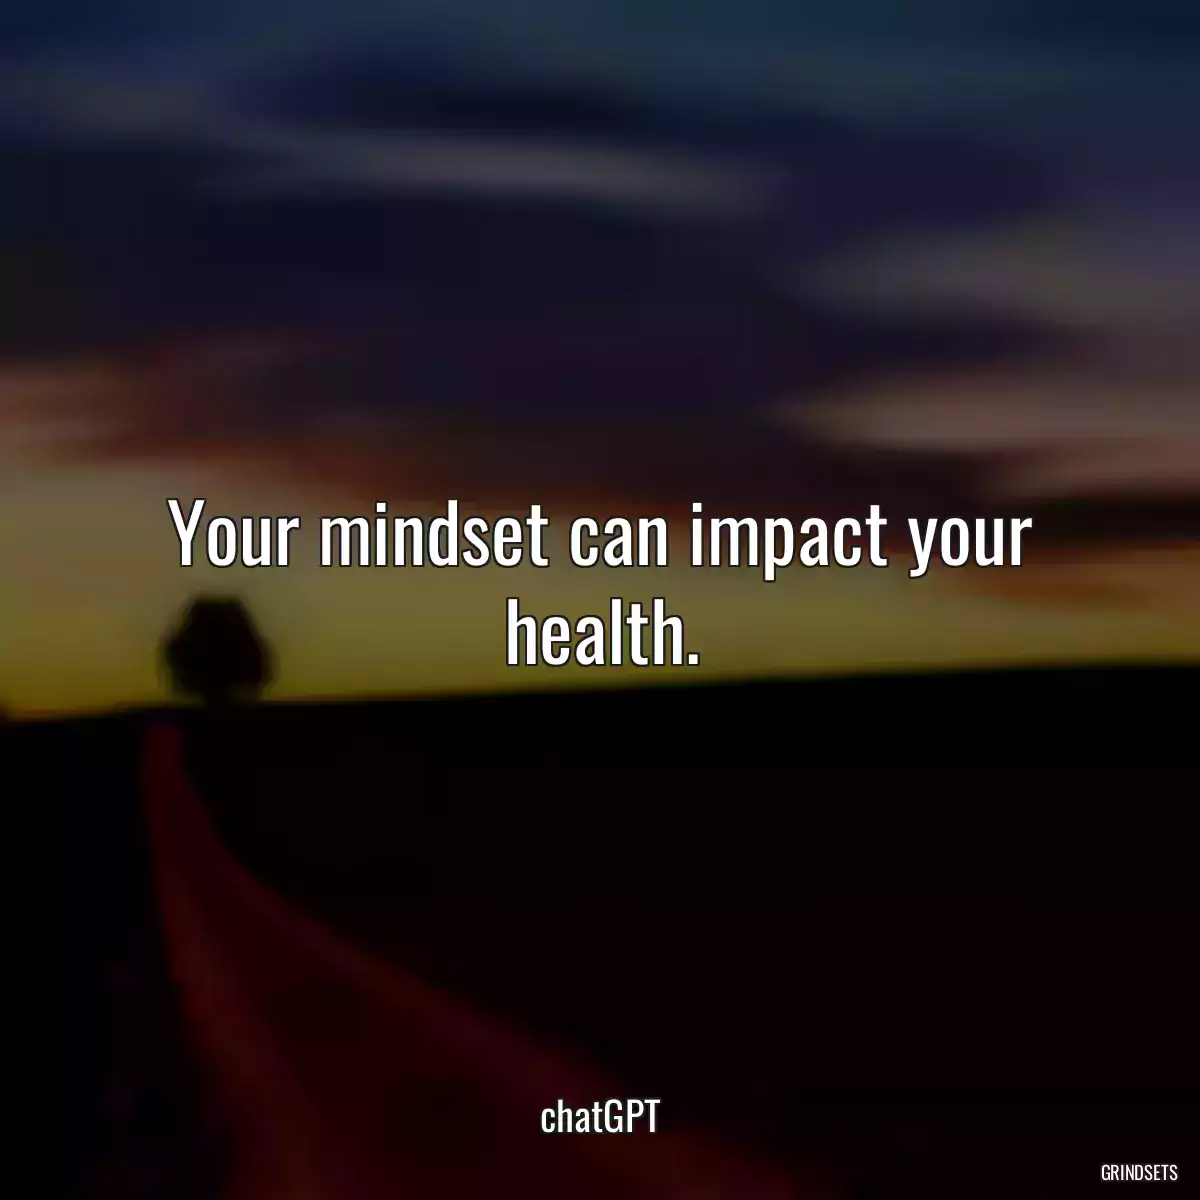 Your mindset can impact your health.